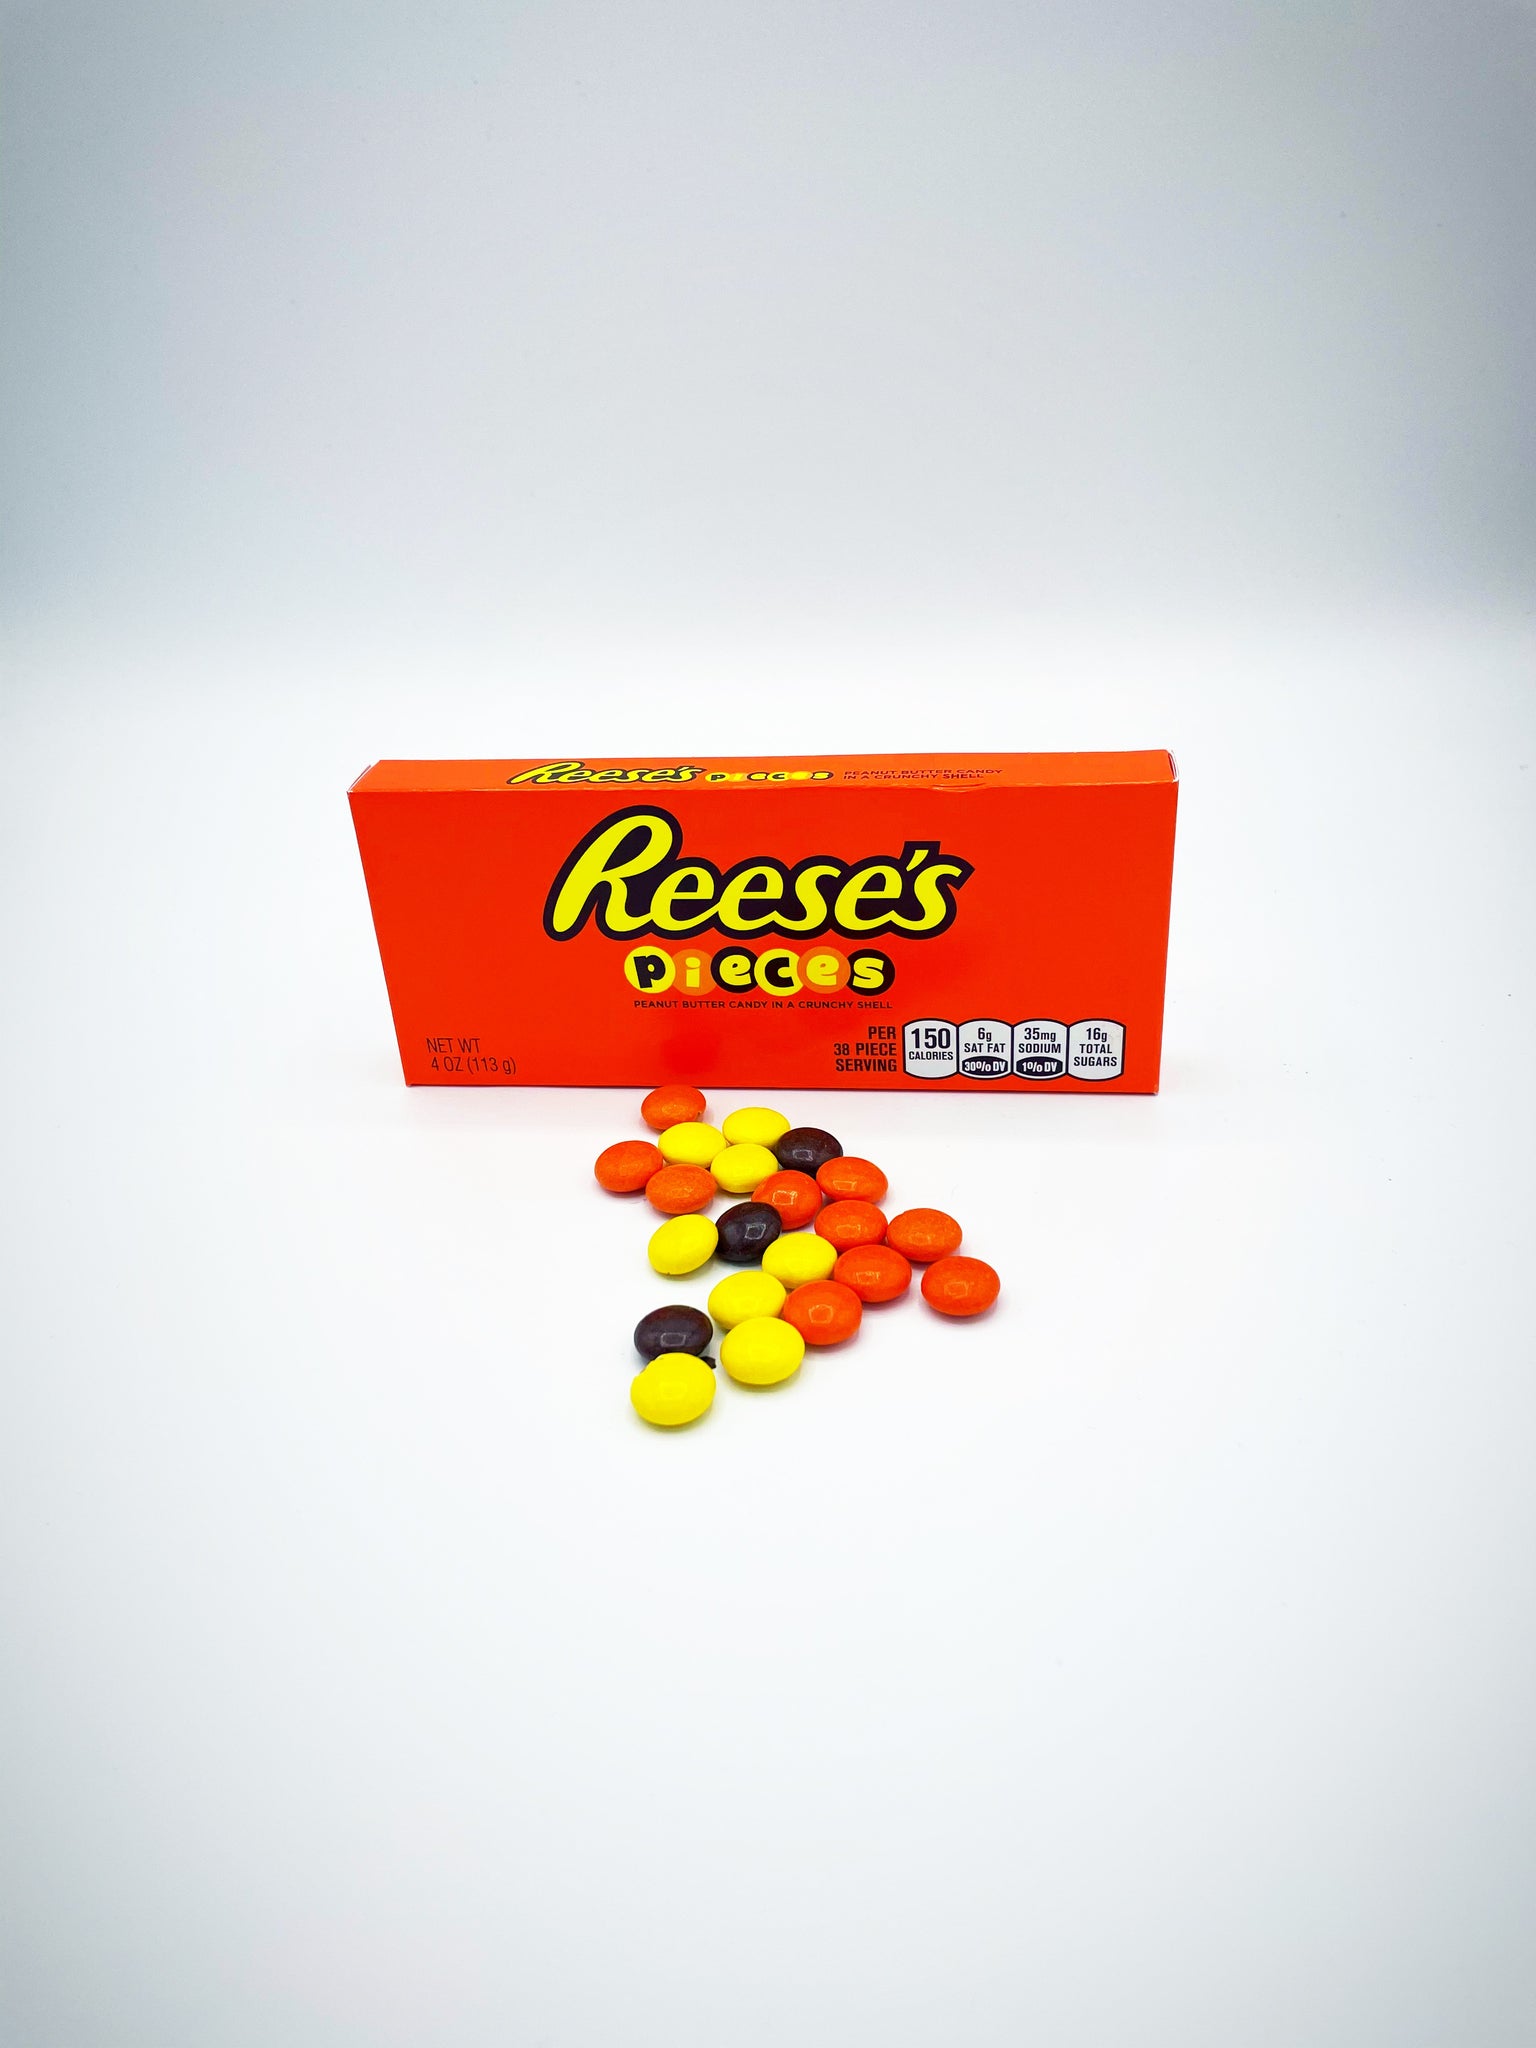 Reese's Pieces Peanut Butter Candy - Theater Box